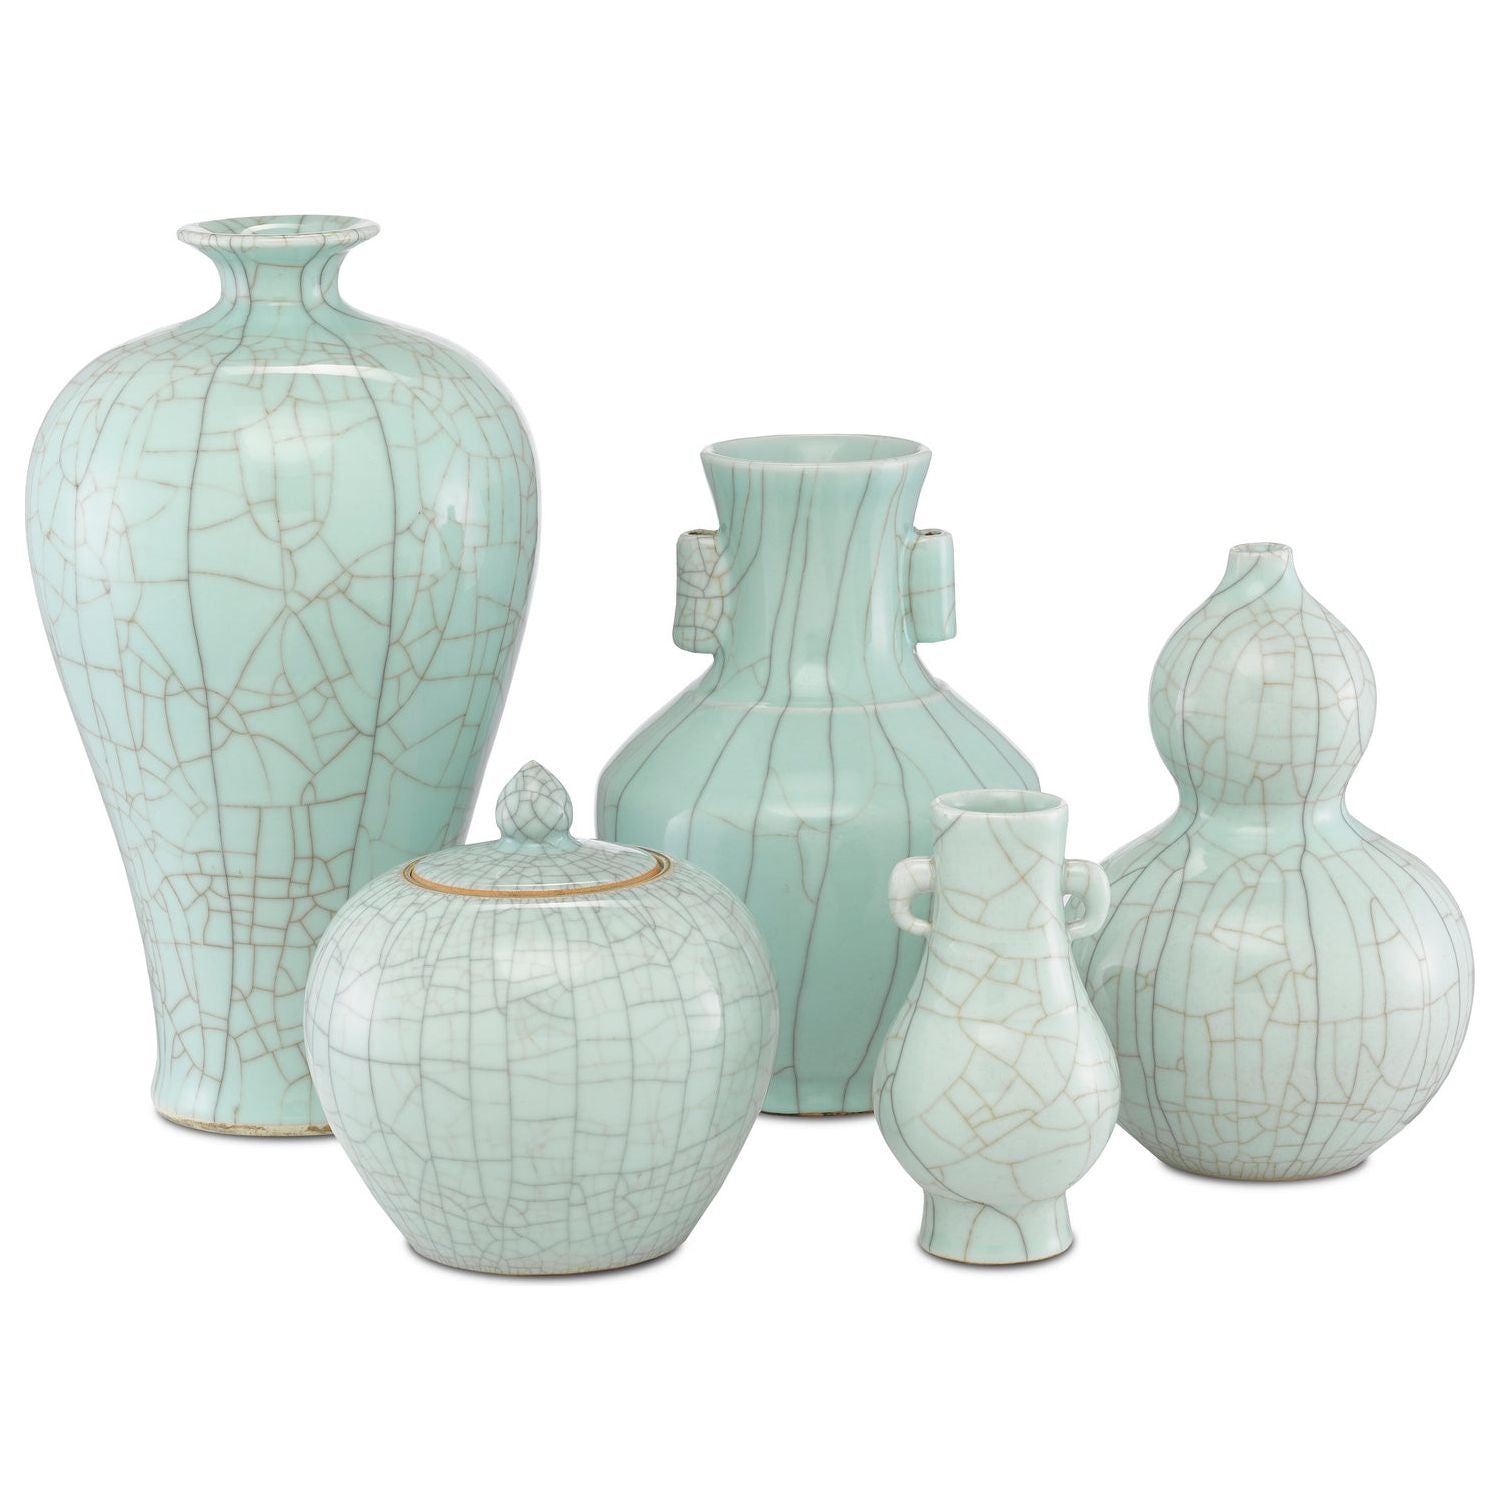 Maiping Double Gourd Vase